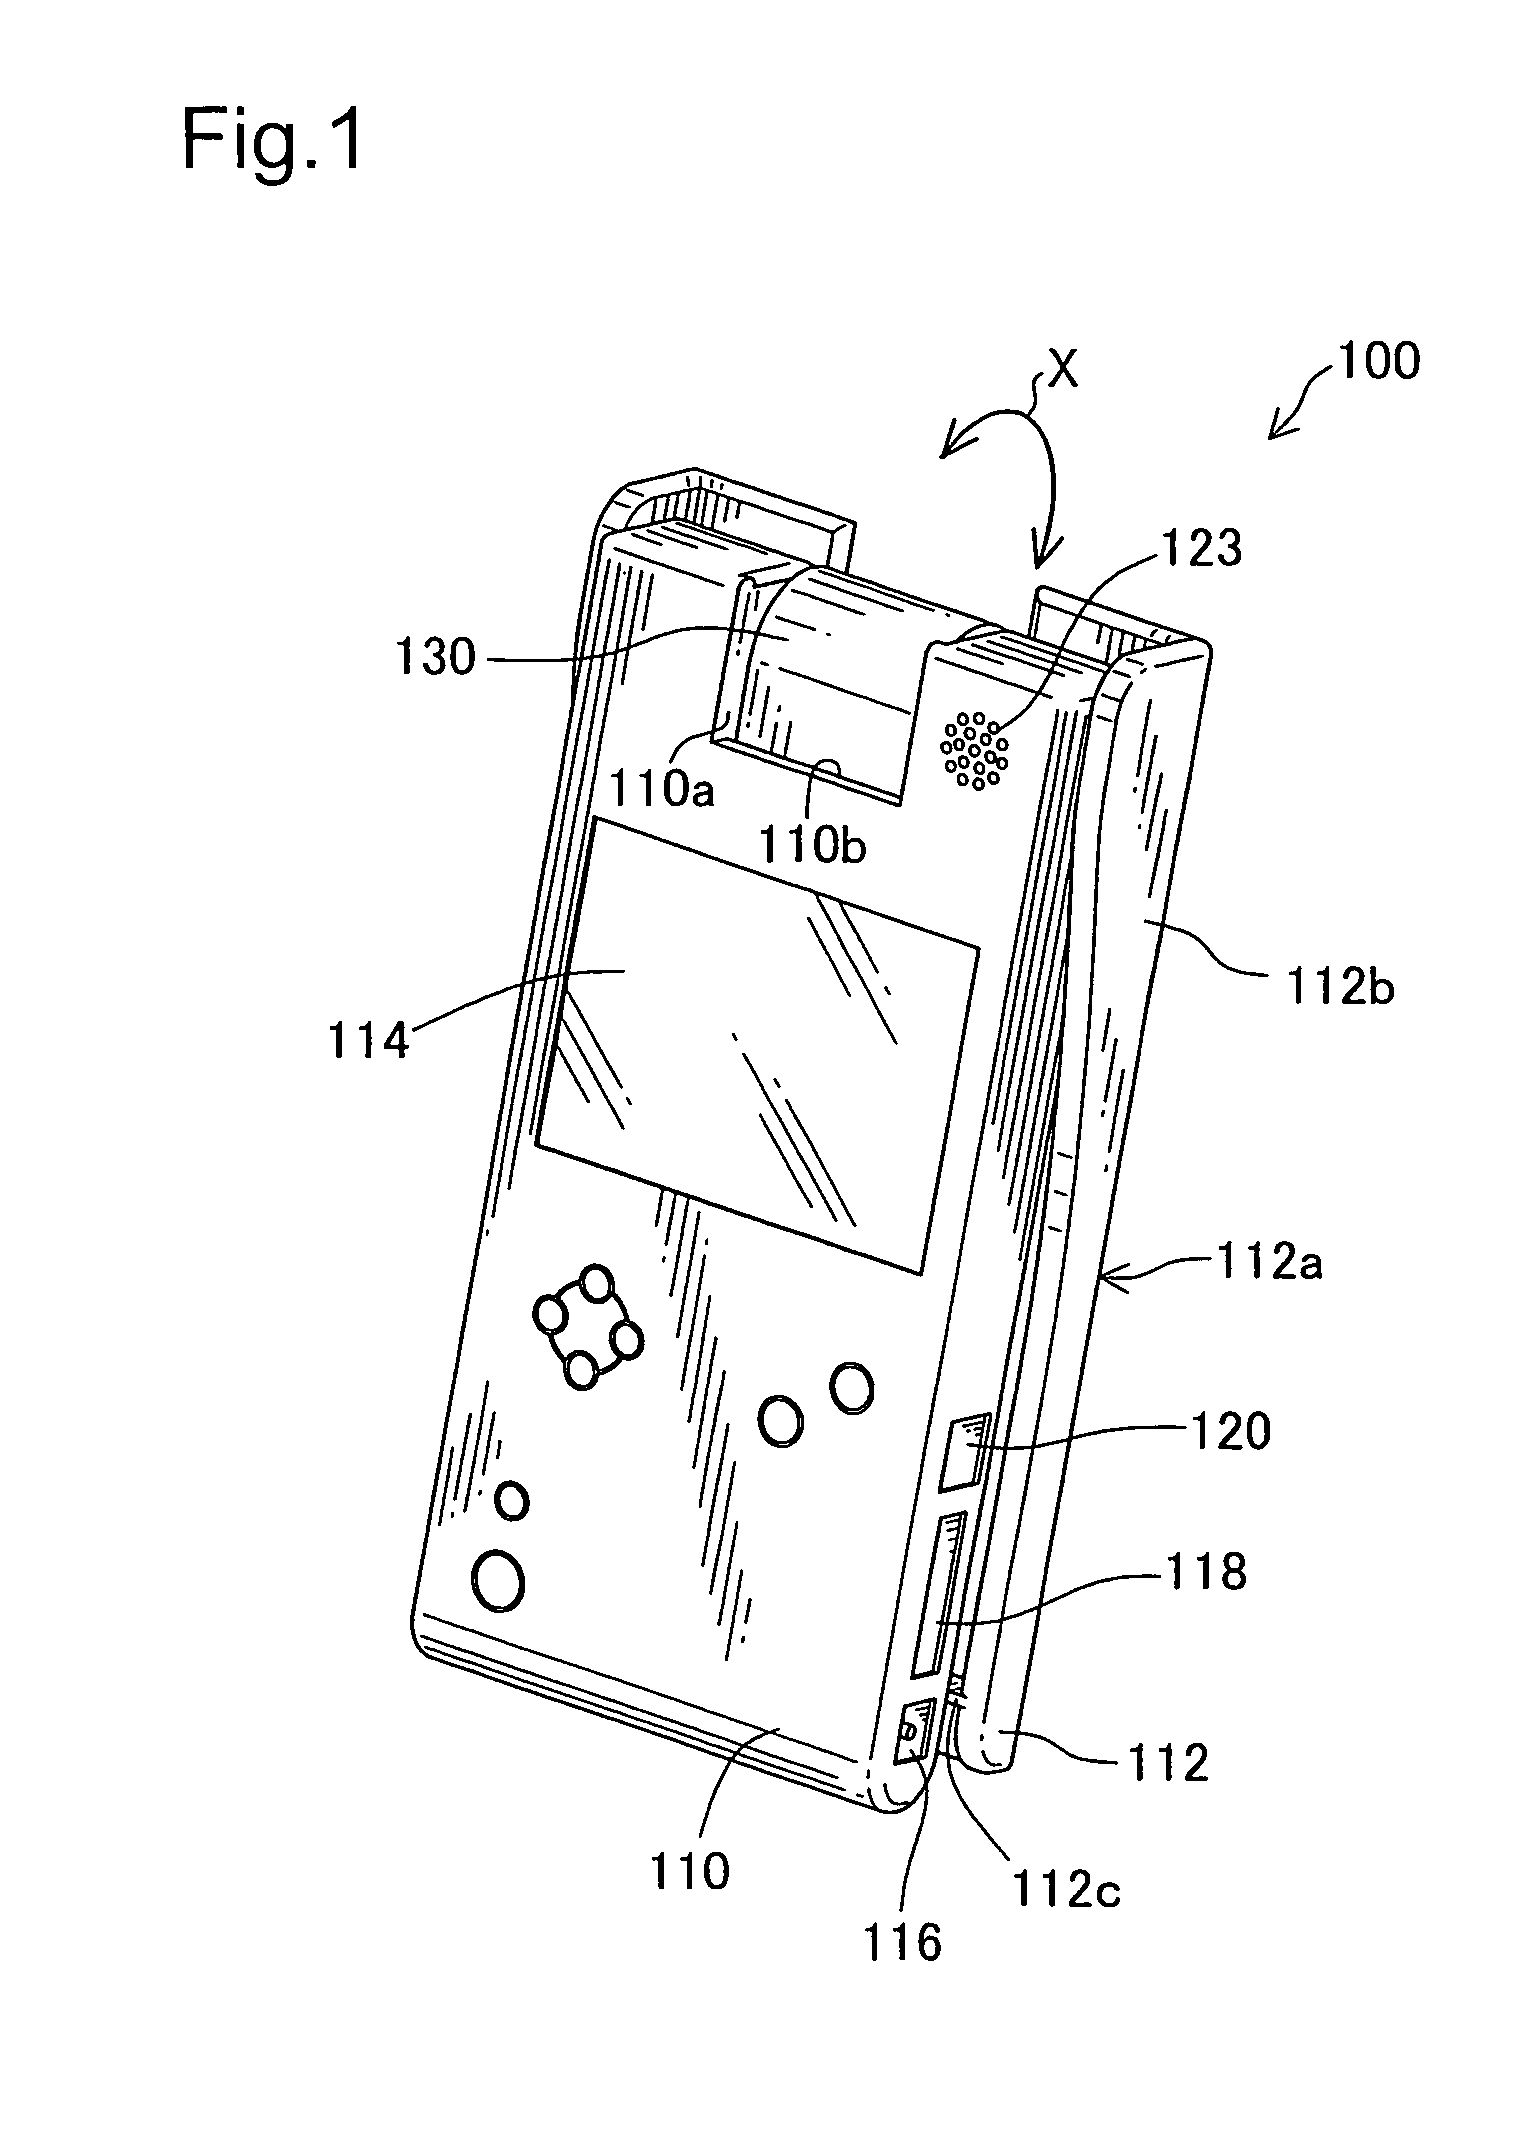 Imaging apparatus for outputting on an external display device an image captured by the apparatus